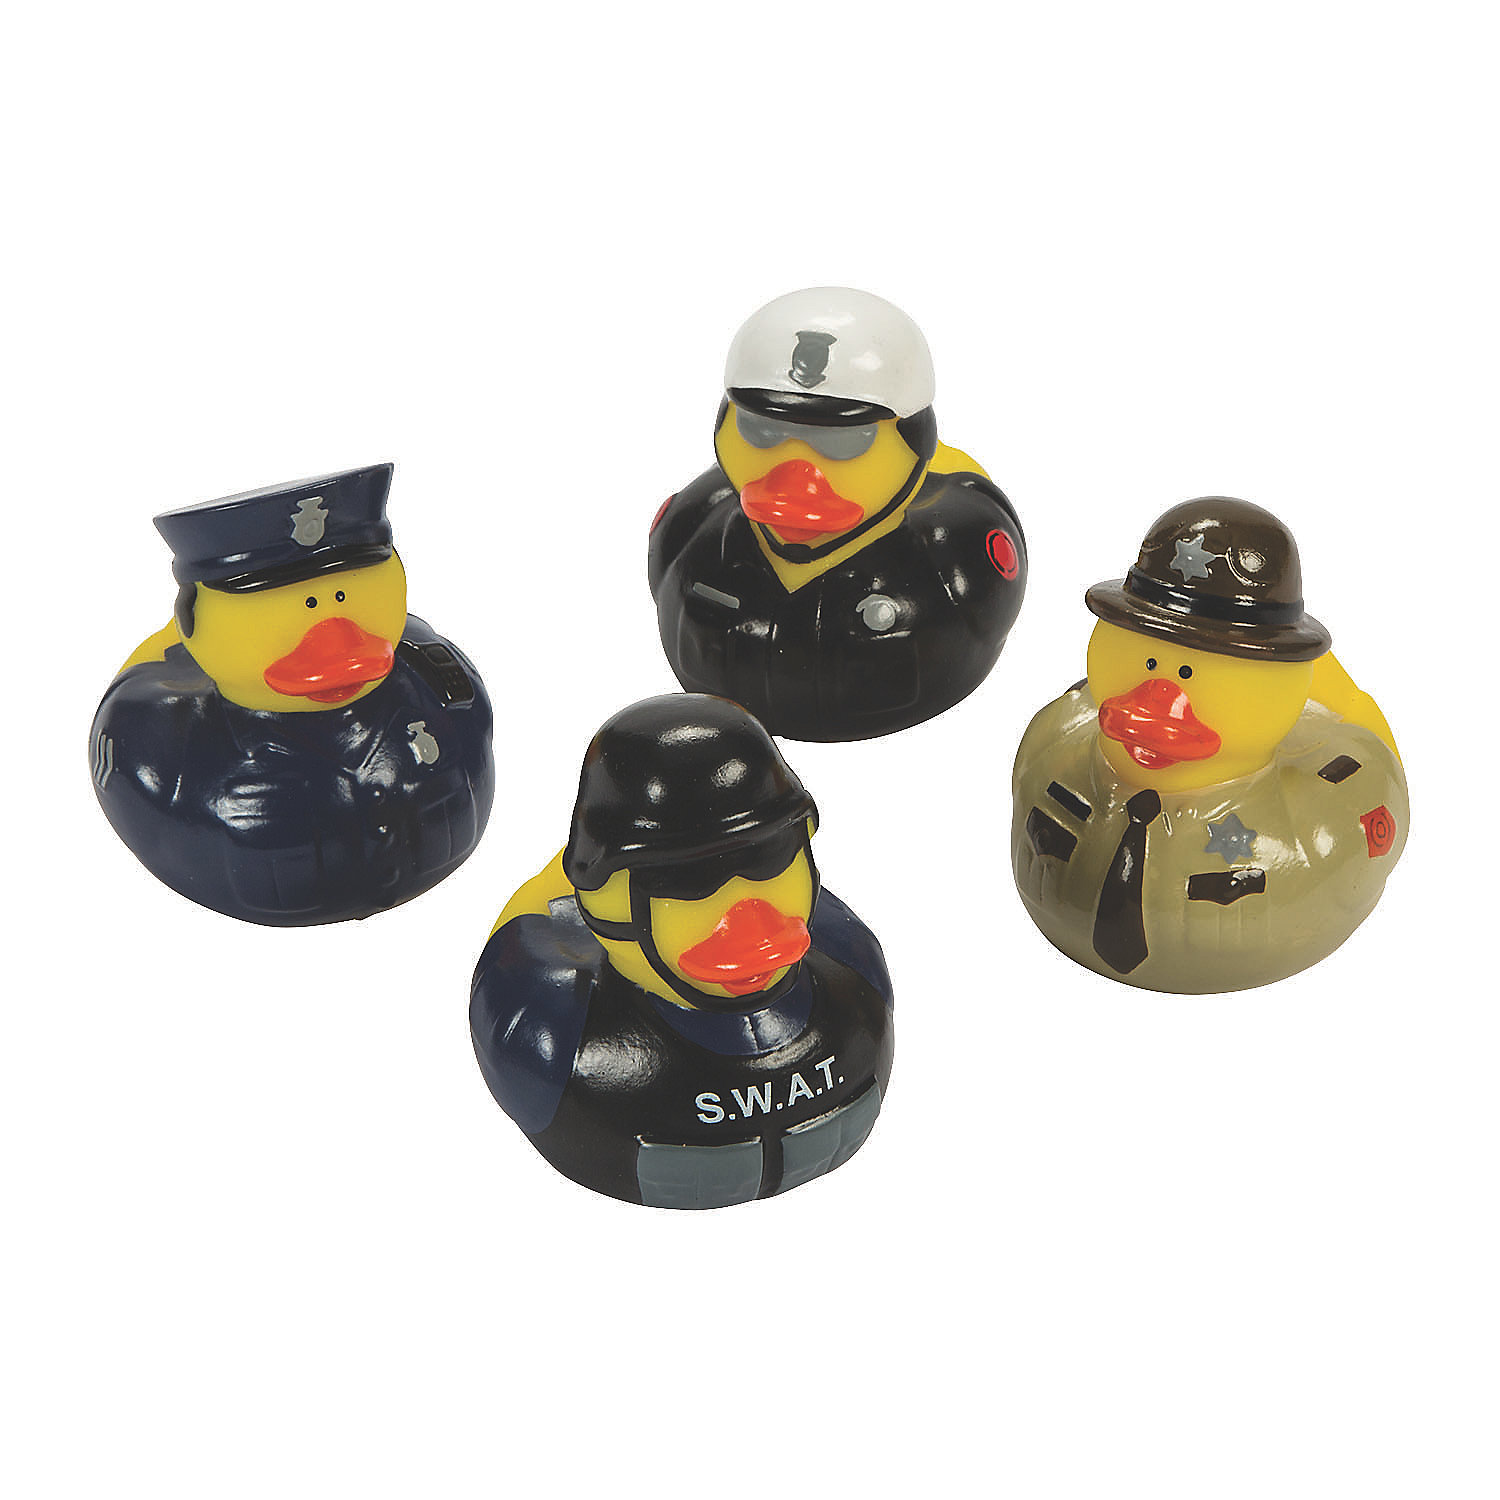 Law Enforcing Rubber Duckies - Party Favors - 12 Pieces - image 1 of 4